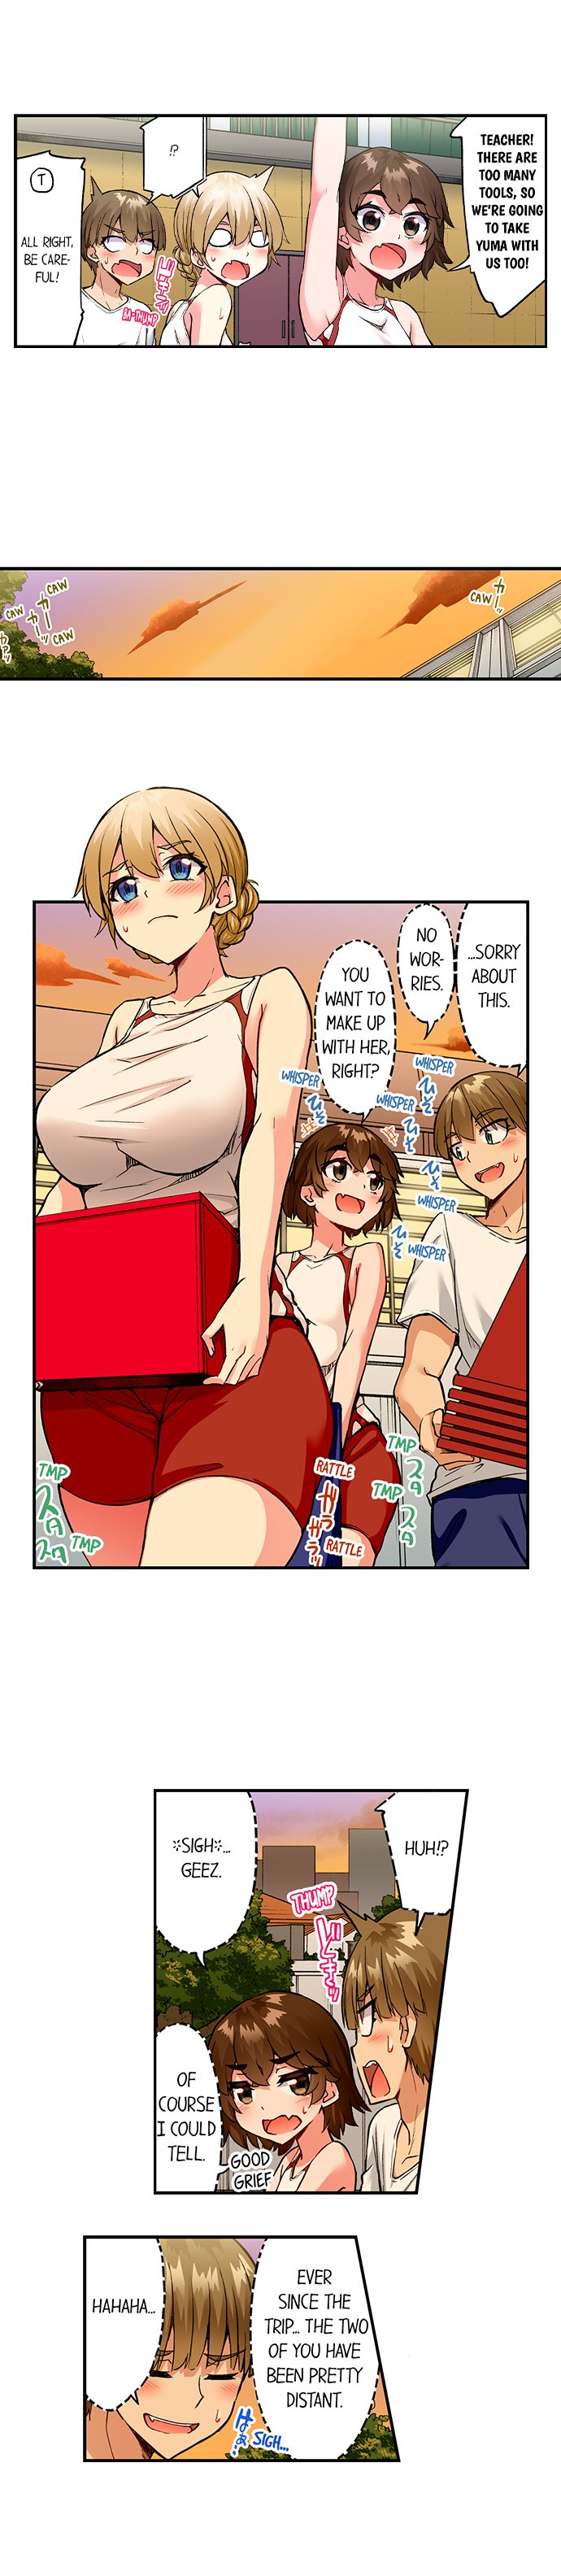 Traditional Job of Washing Girls’ Body - Chapter 178 Page 5